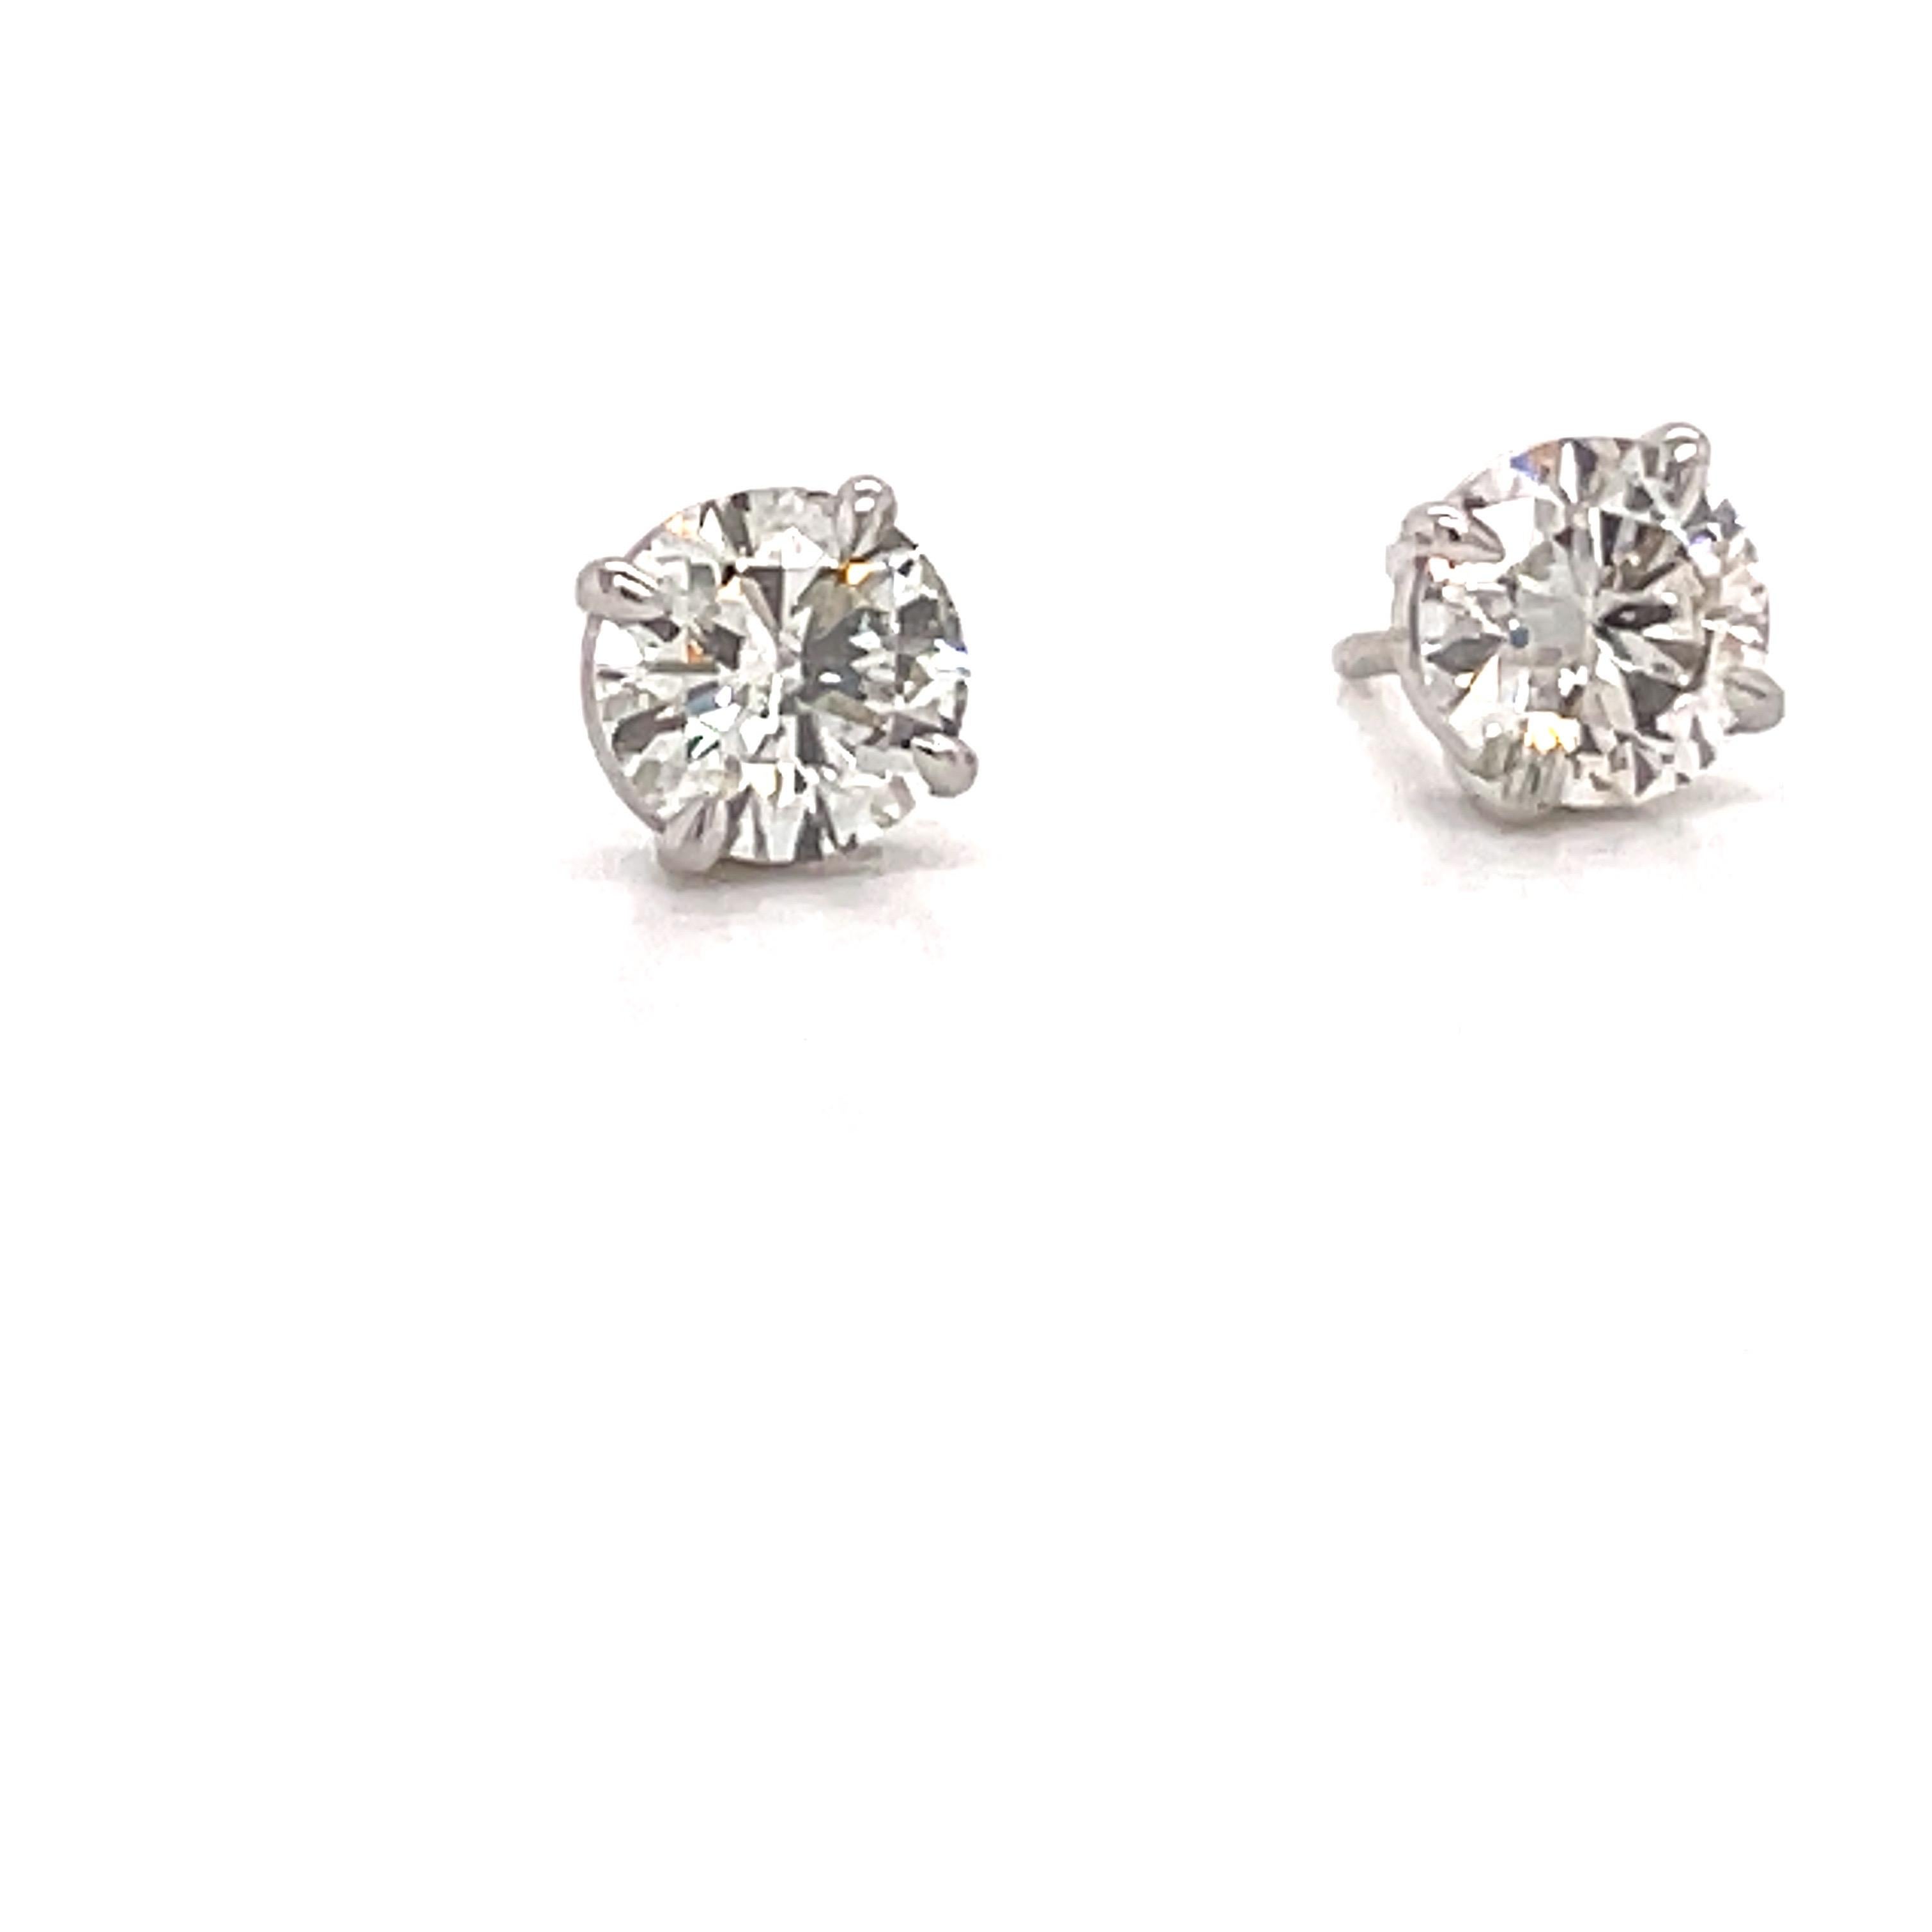 Diamond stud earrings weighing 1.83 carats in a 4 prong classic setting, crafted in 14k white gold. 
Color J-K
Clarity SI2-SI3

Email for more inventory. 